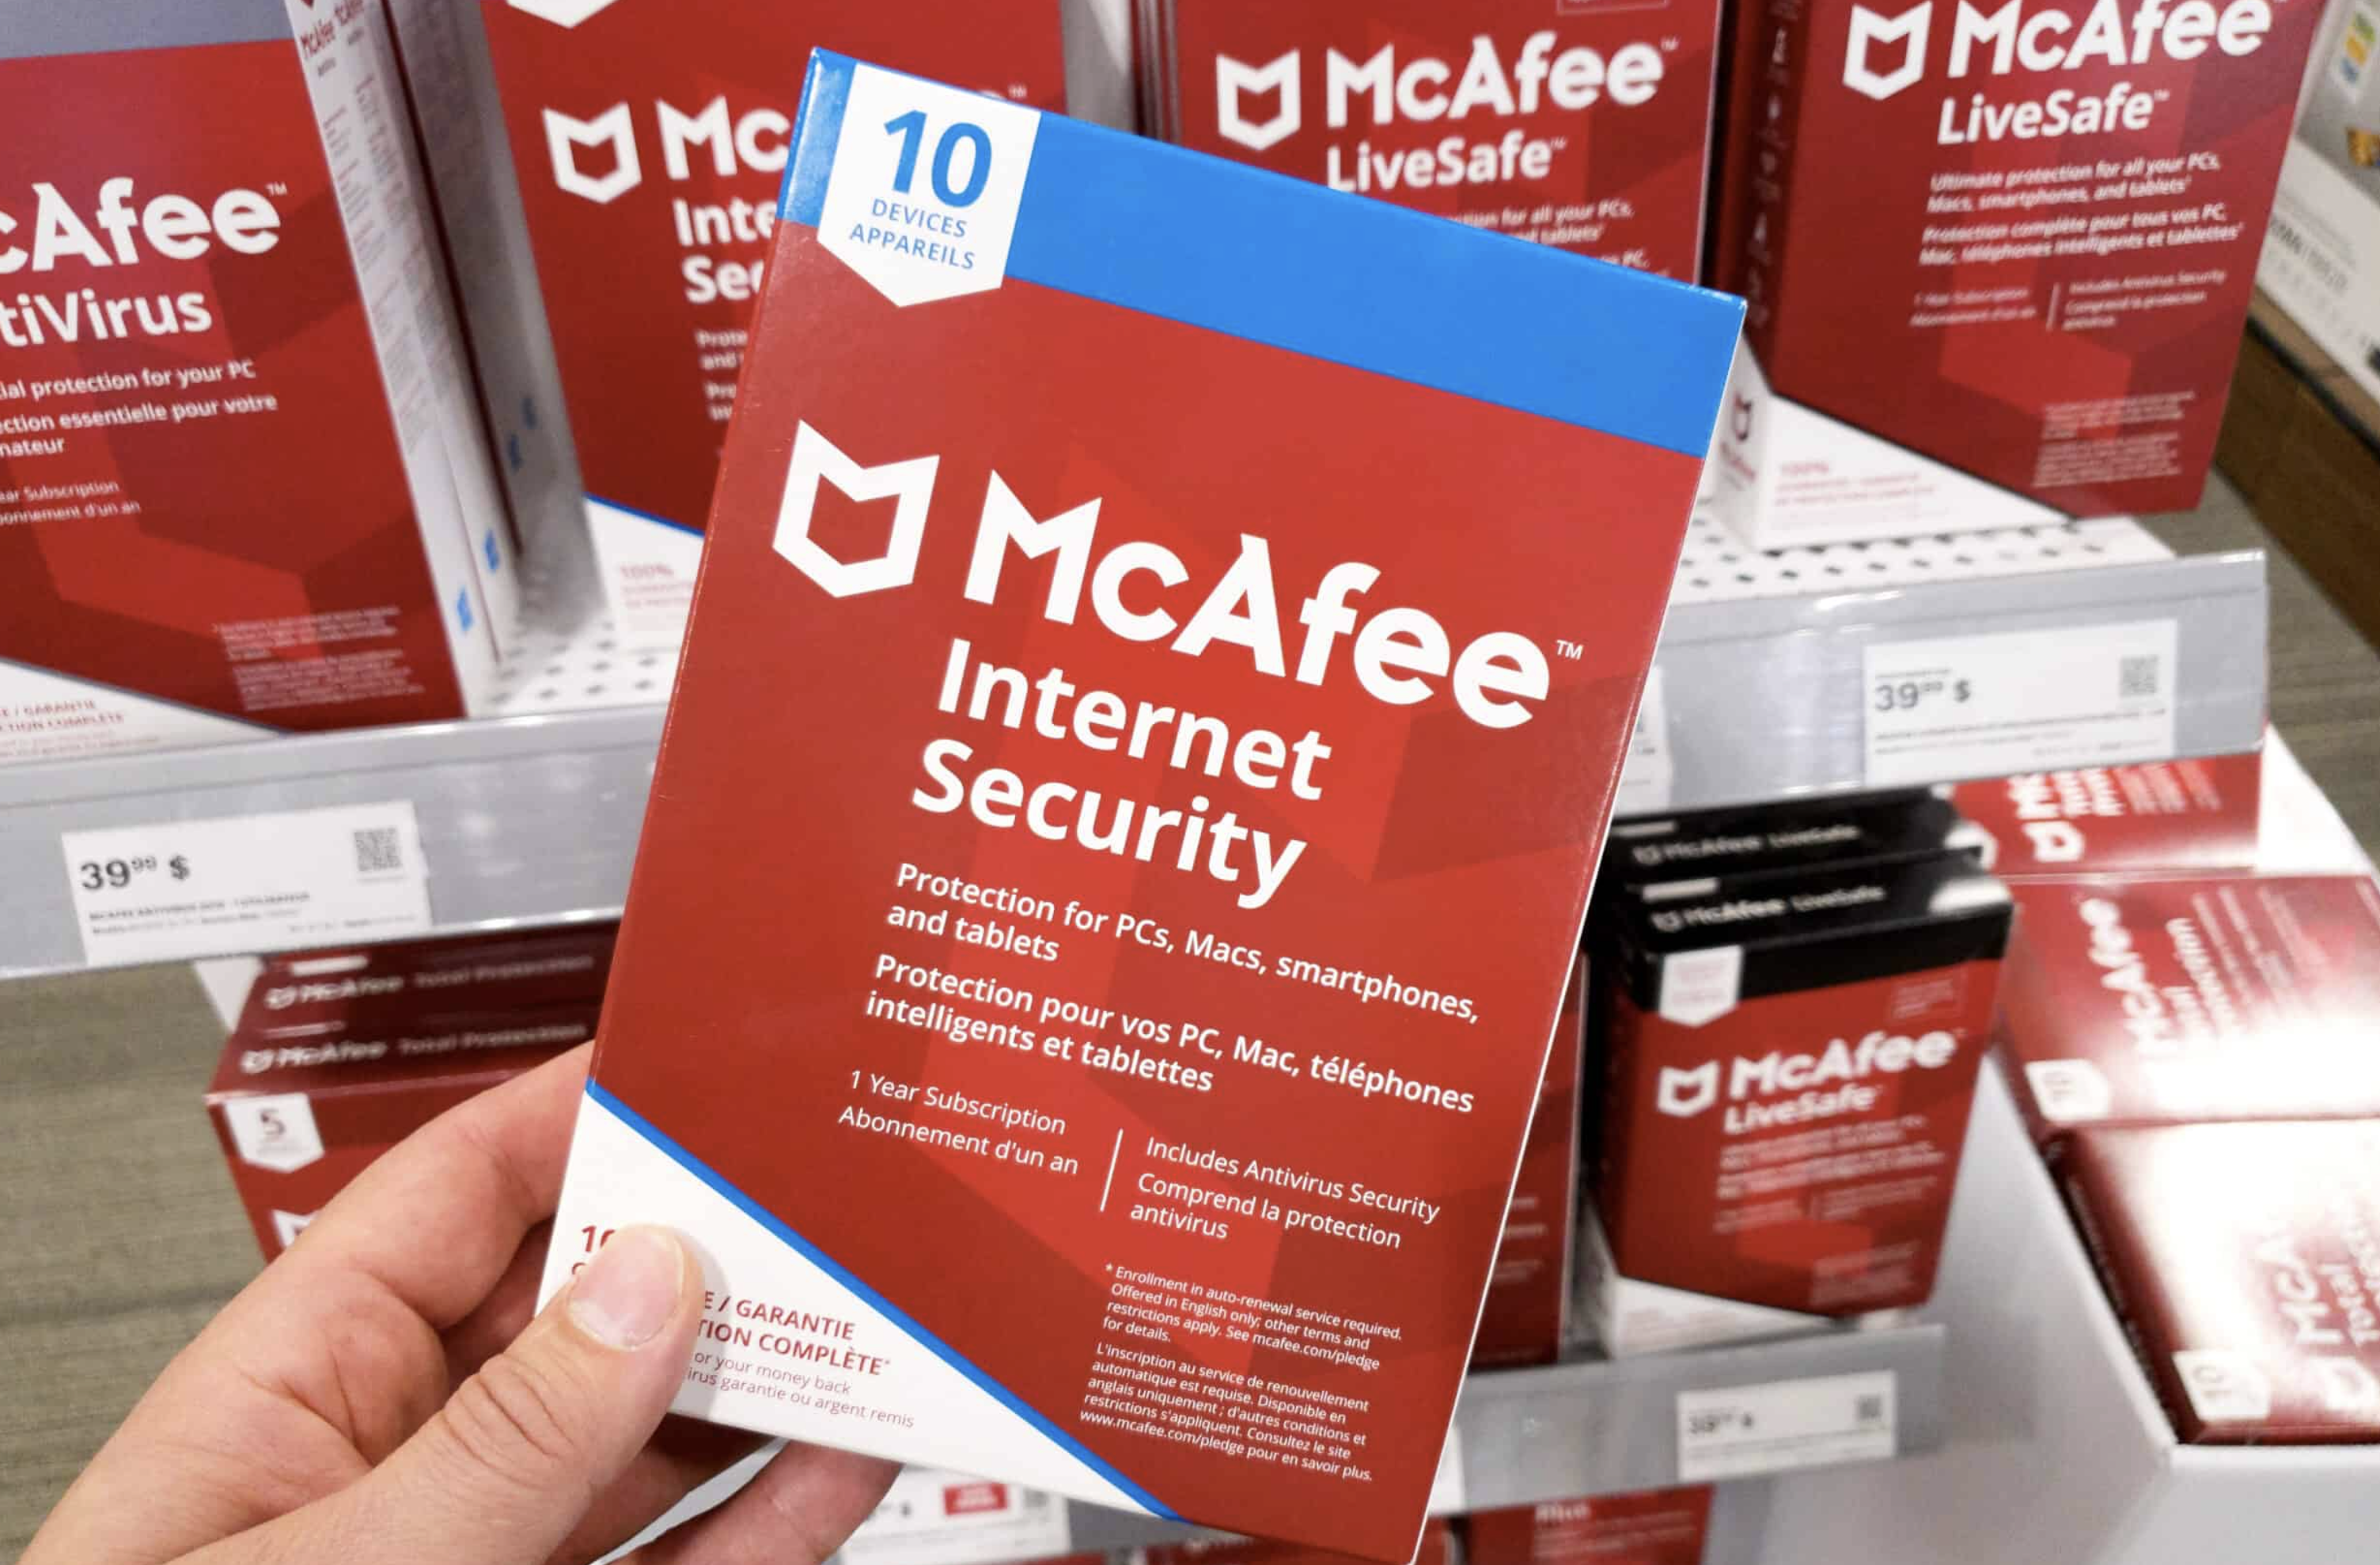 A person holding a phsyical copy of McAfee Antivirus in a retail store.